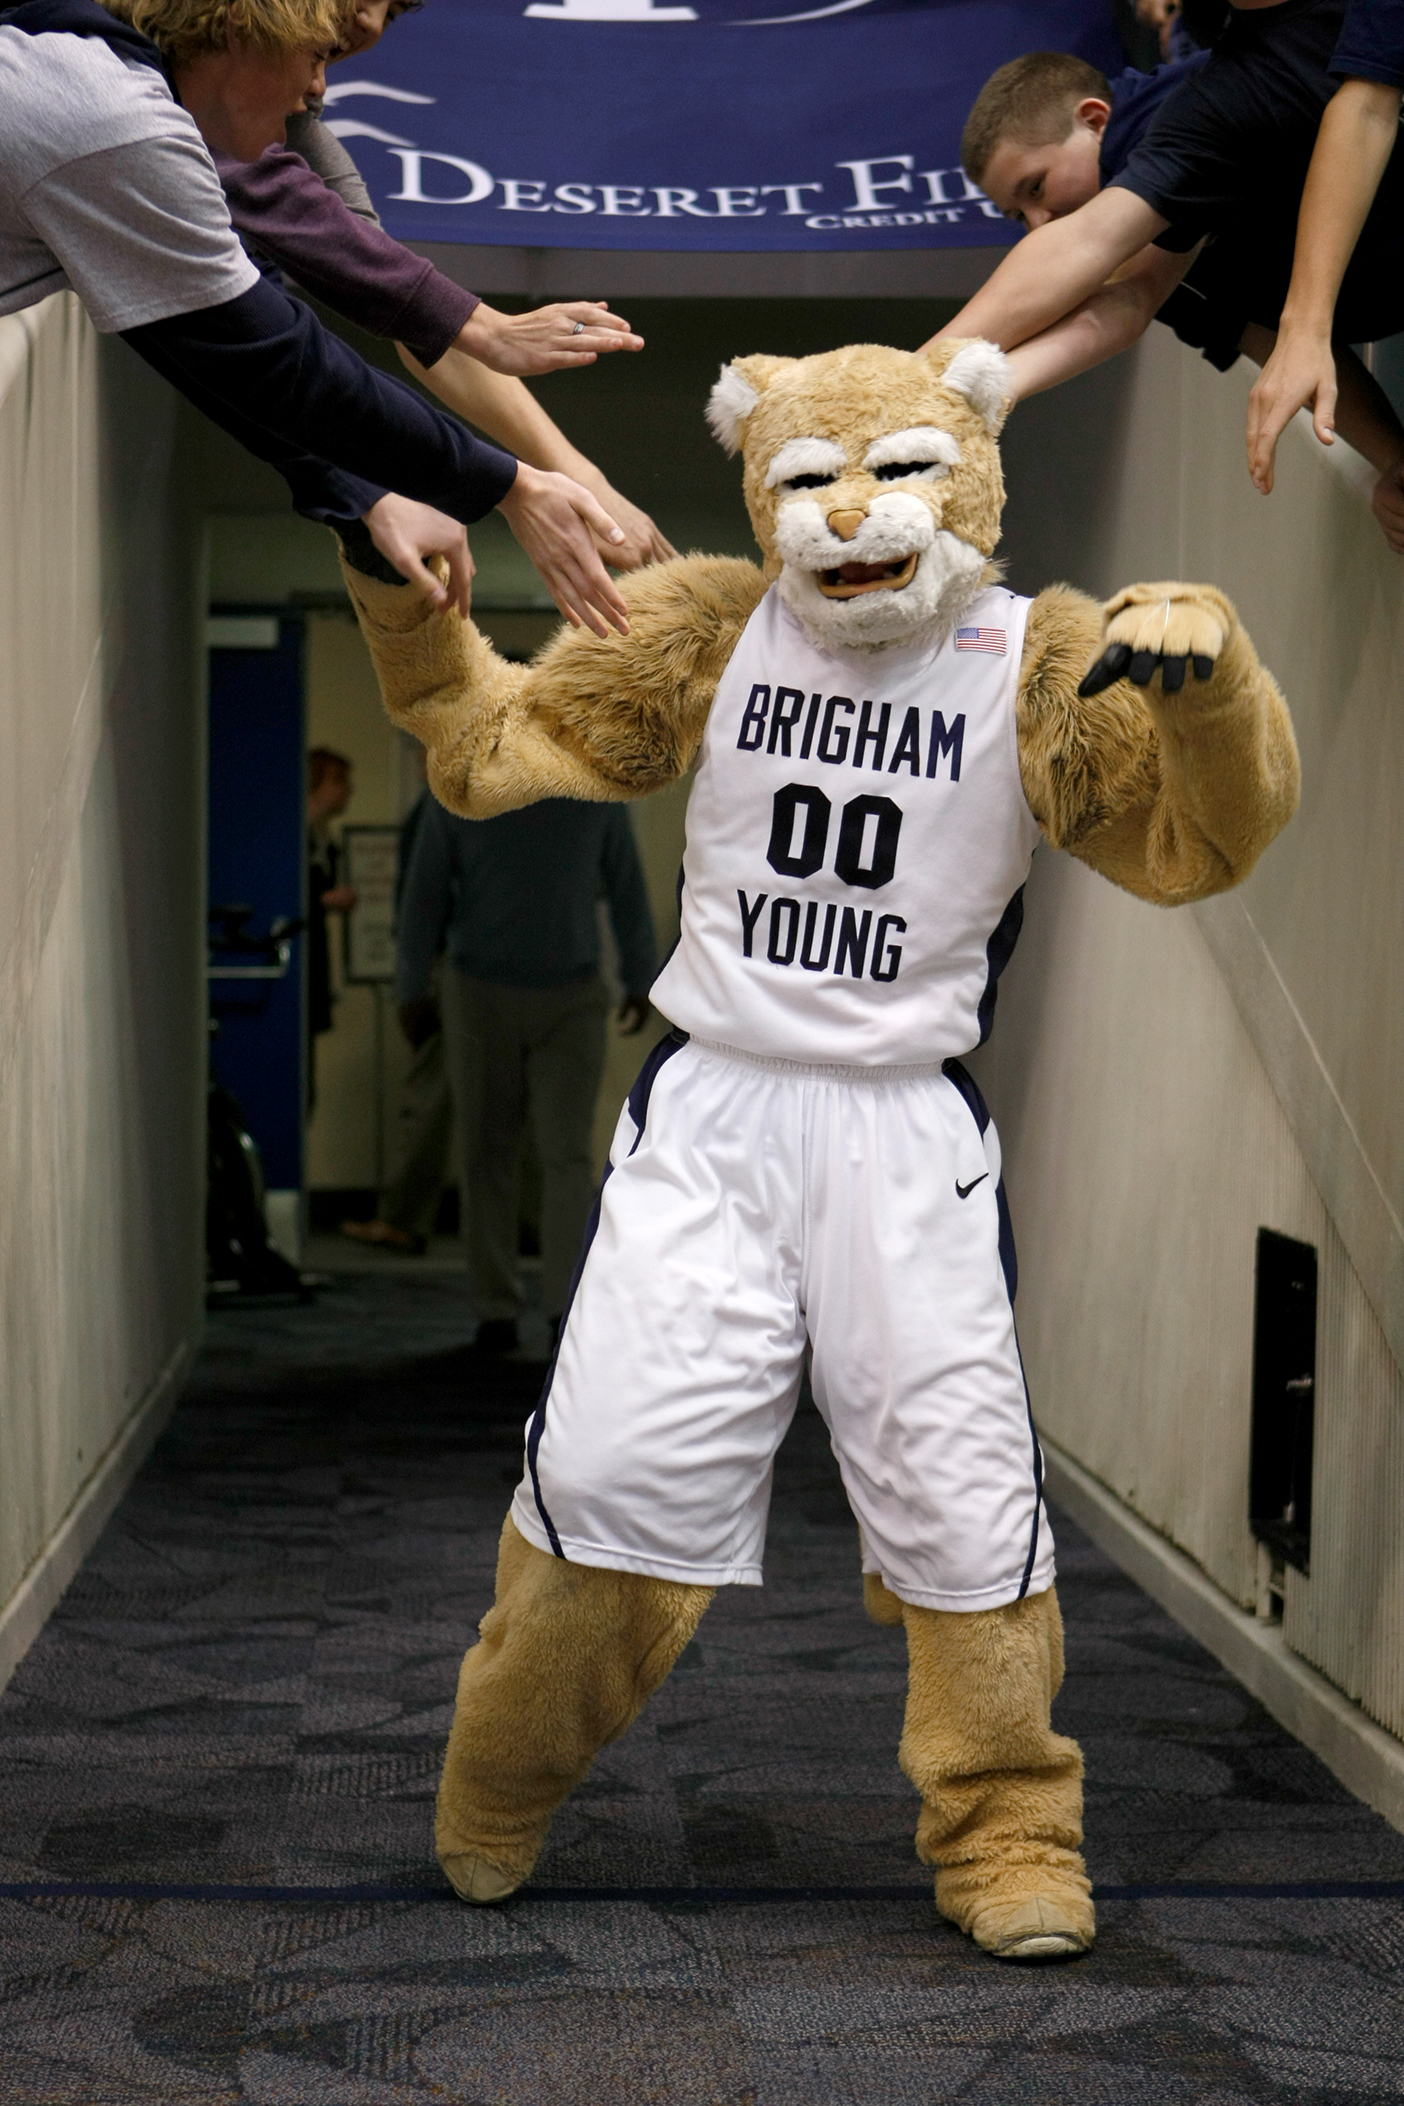 Cosmo getting ready to enter the Marriott Center for a basketball.